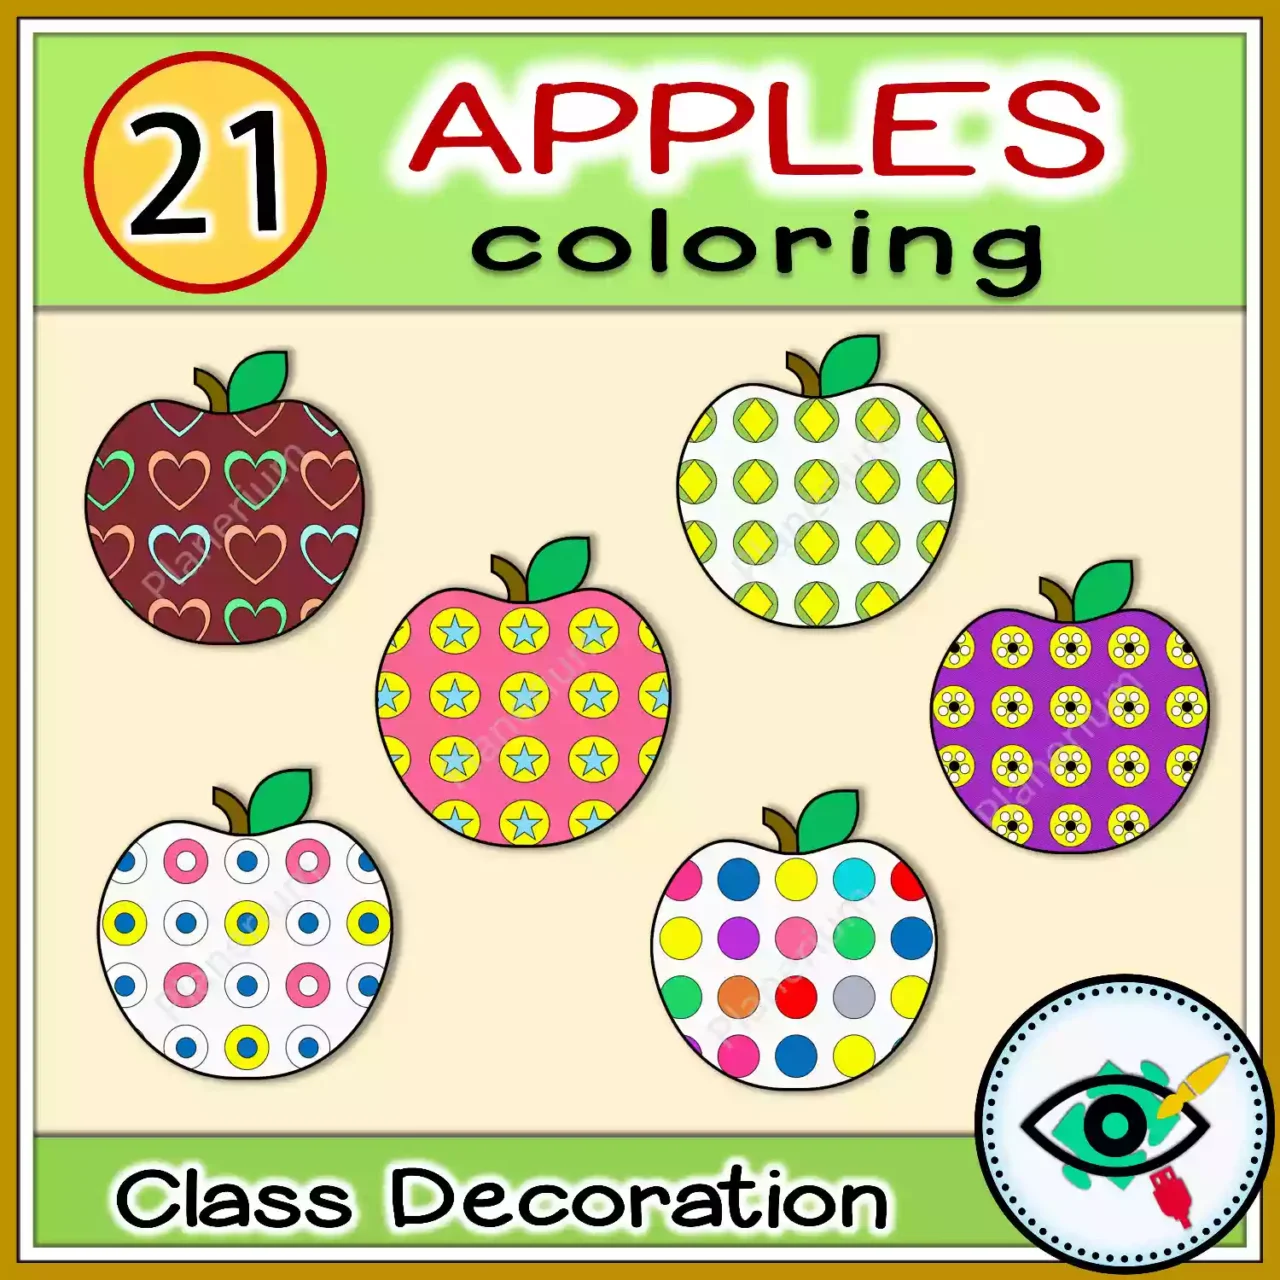 Apple Patterns Coloring - Black and White - Featured 2